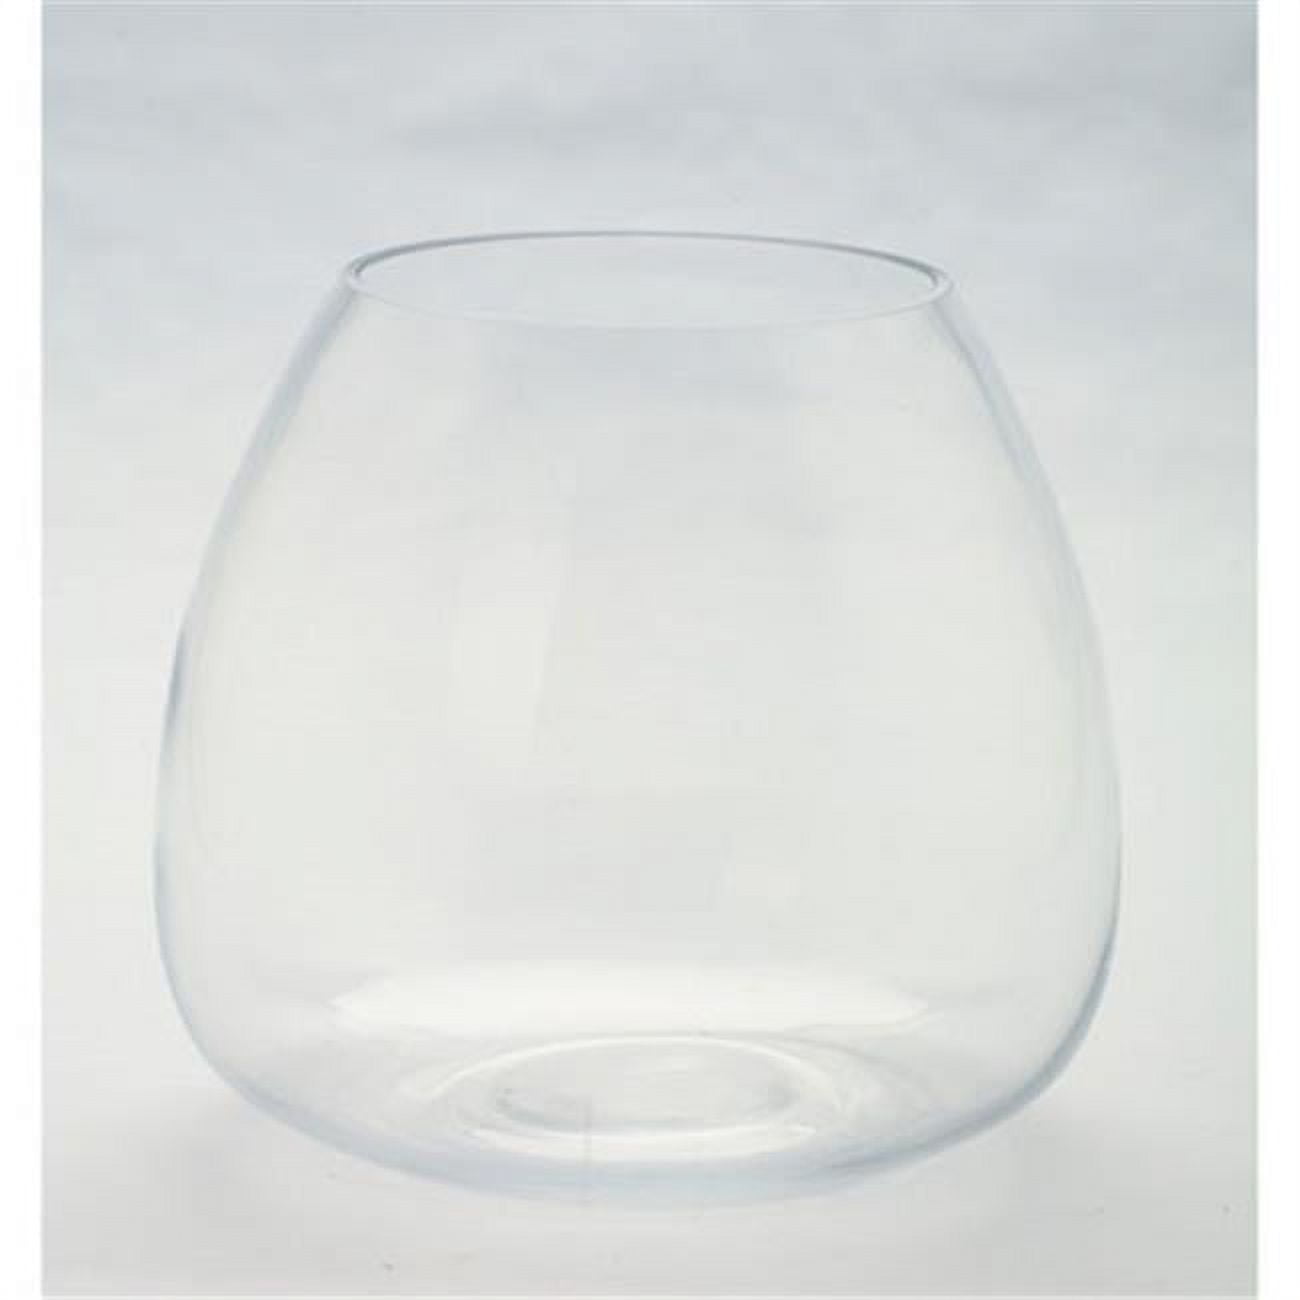 84021s 6.5 X 7.5 In. Glass Vase Candleholder, Clear